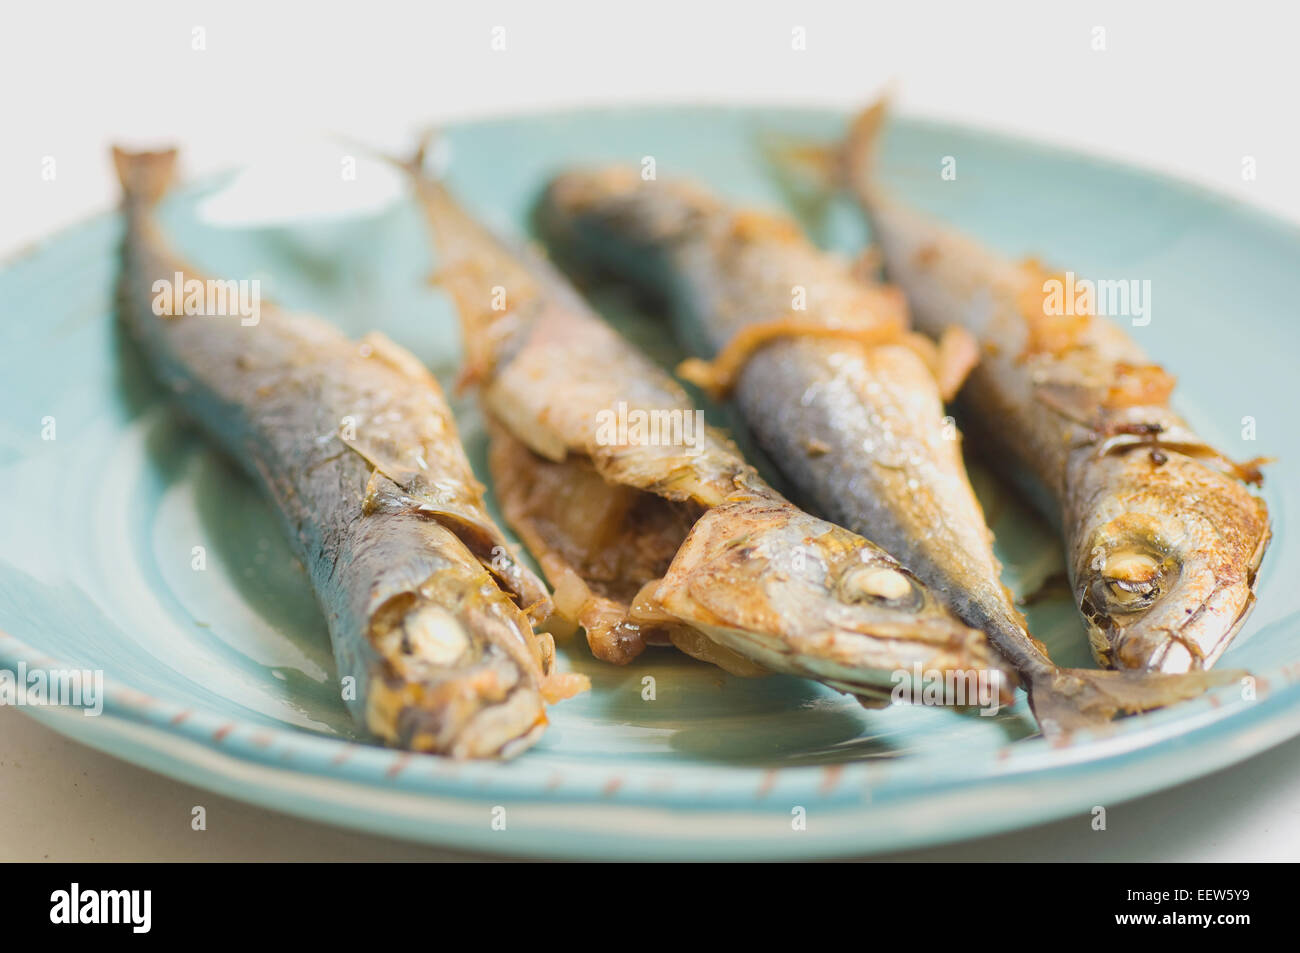 Plate of fried fish Stock Photo